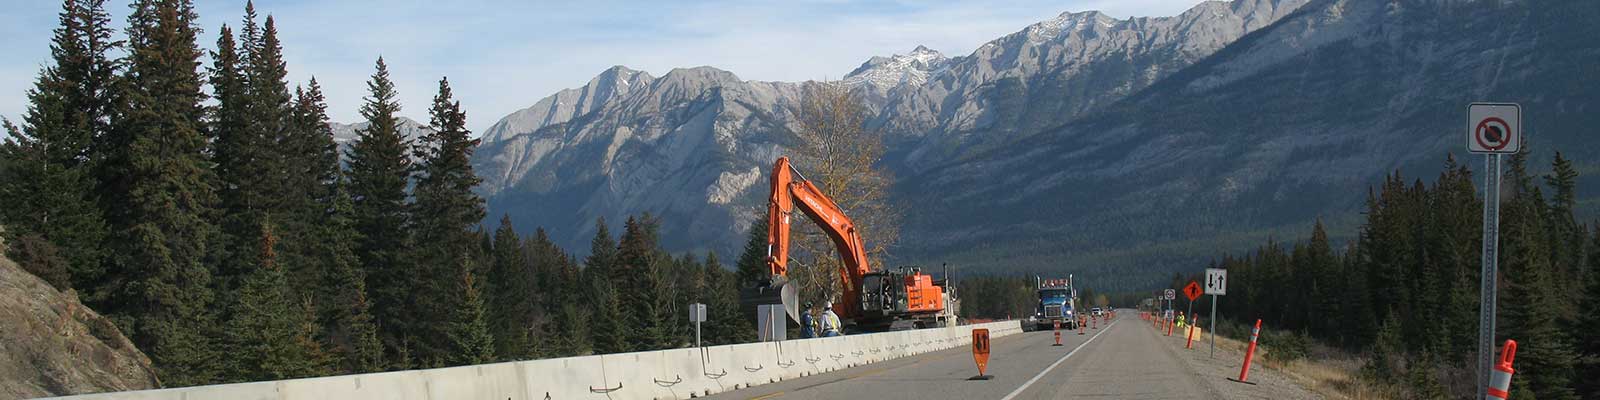 SPRINGTIME PAVING ON THE TRANS-CANADA HIGHWAY